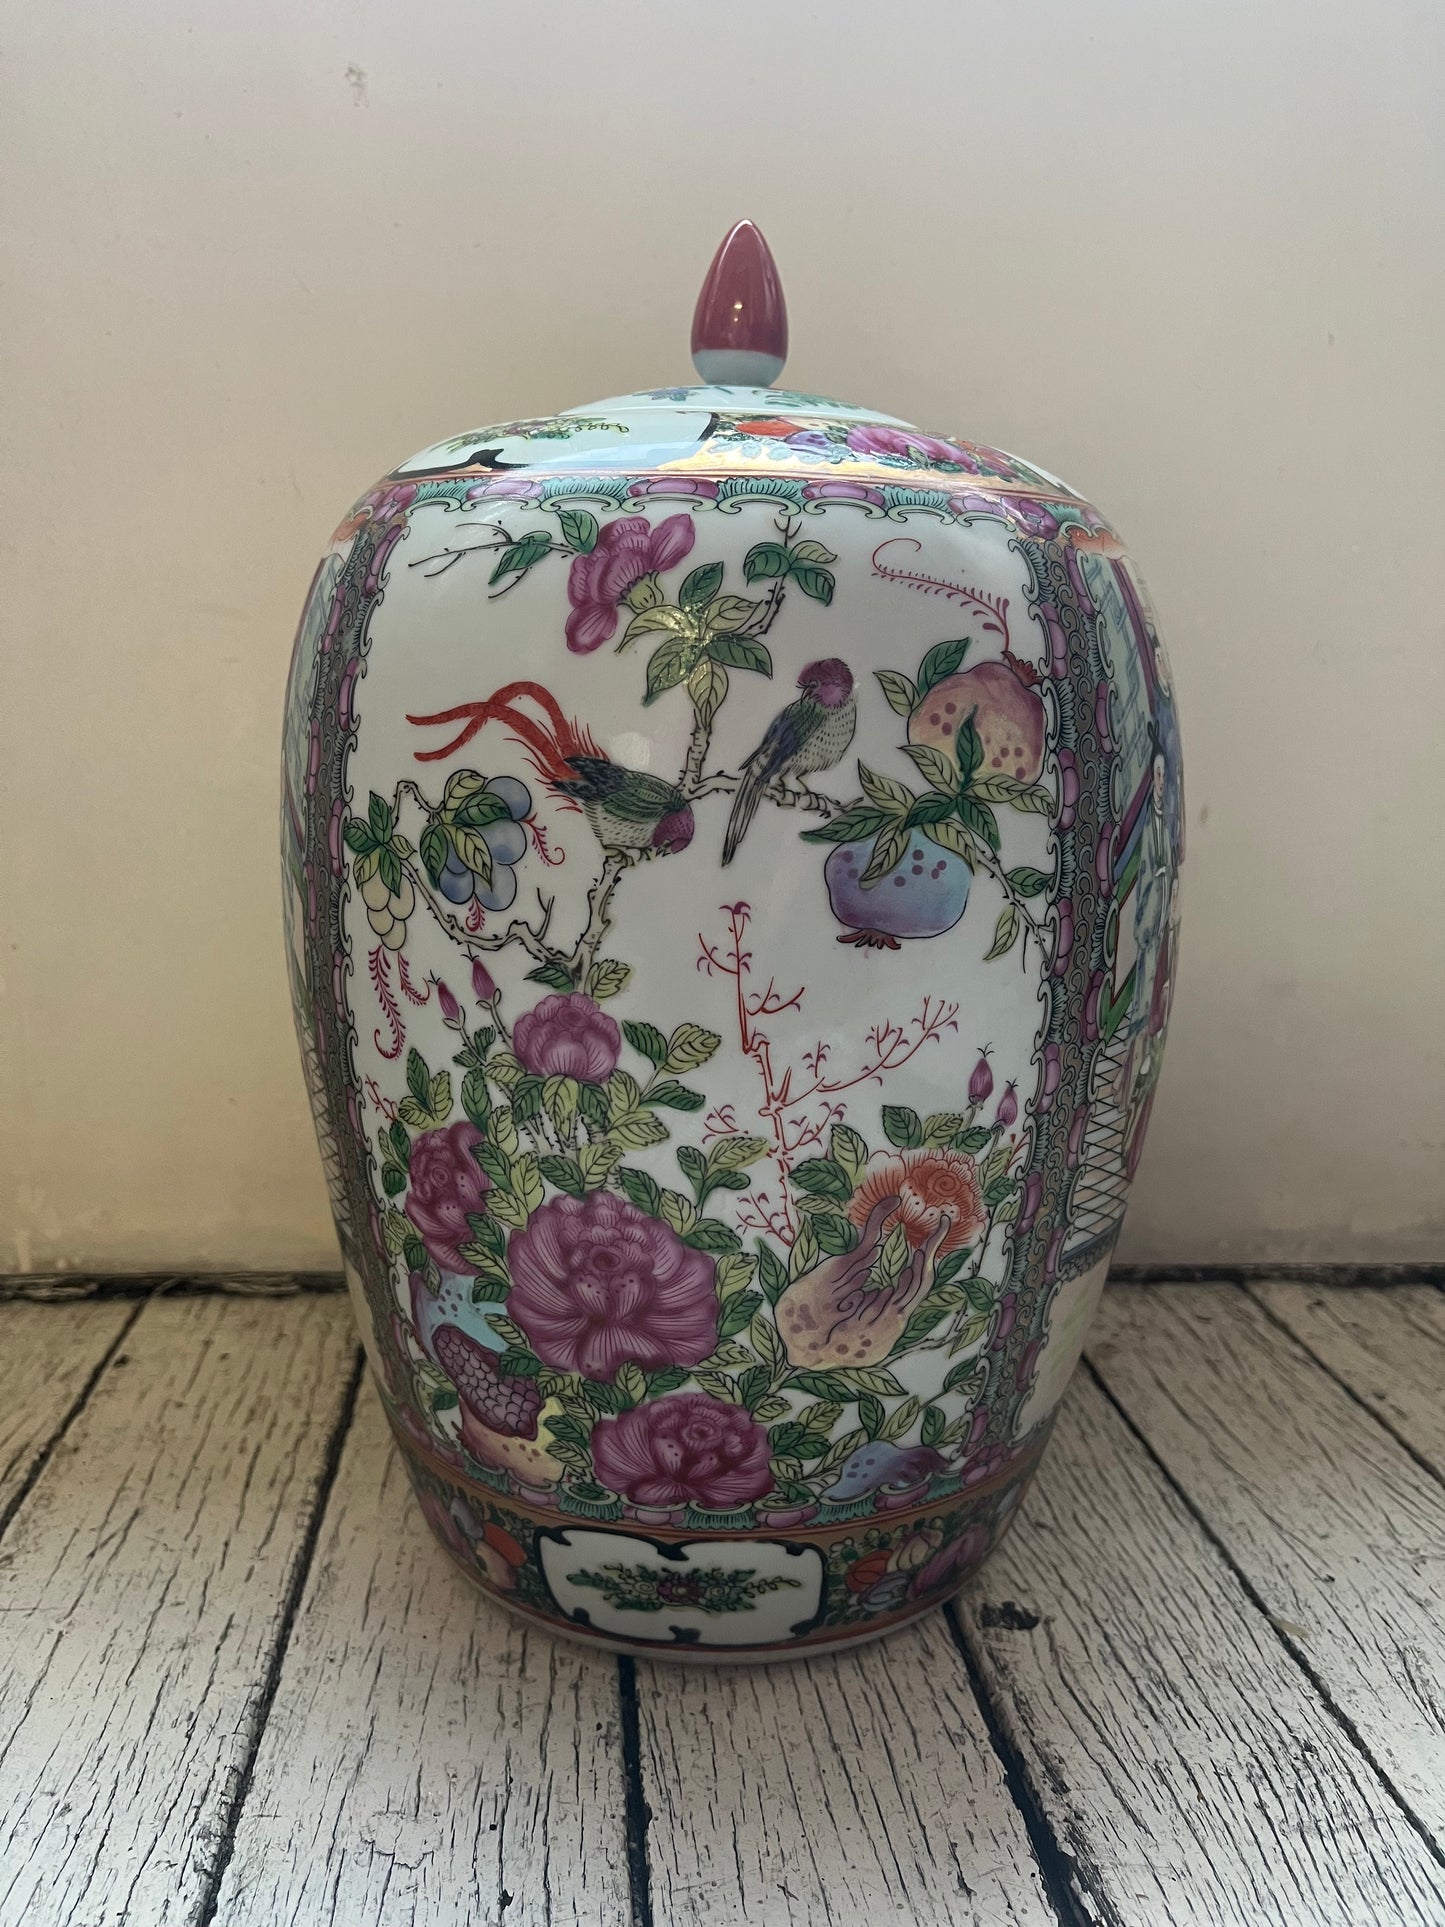 Monumental Late Qing Guangxi Period Canton Famille Rose Lidded Cover Jar